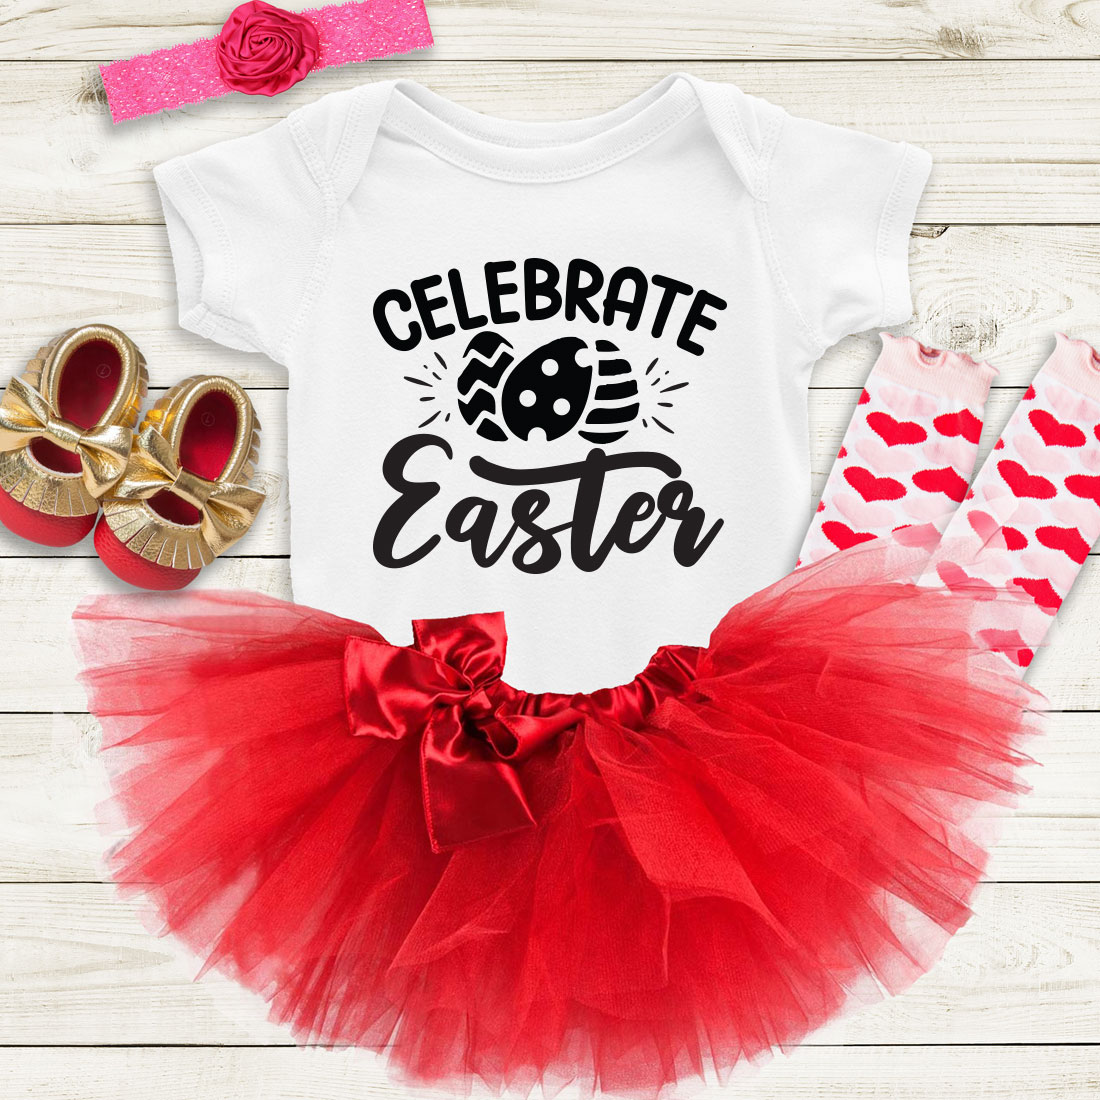 Baby girl's birthday outfit with a red tutu and red shoes.